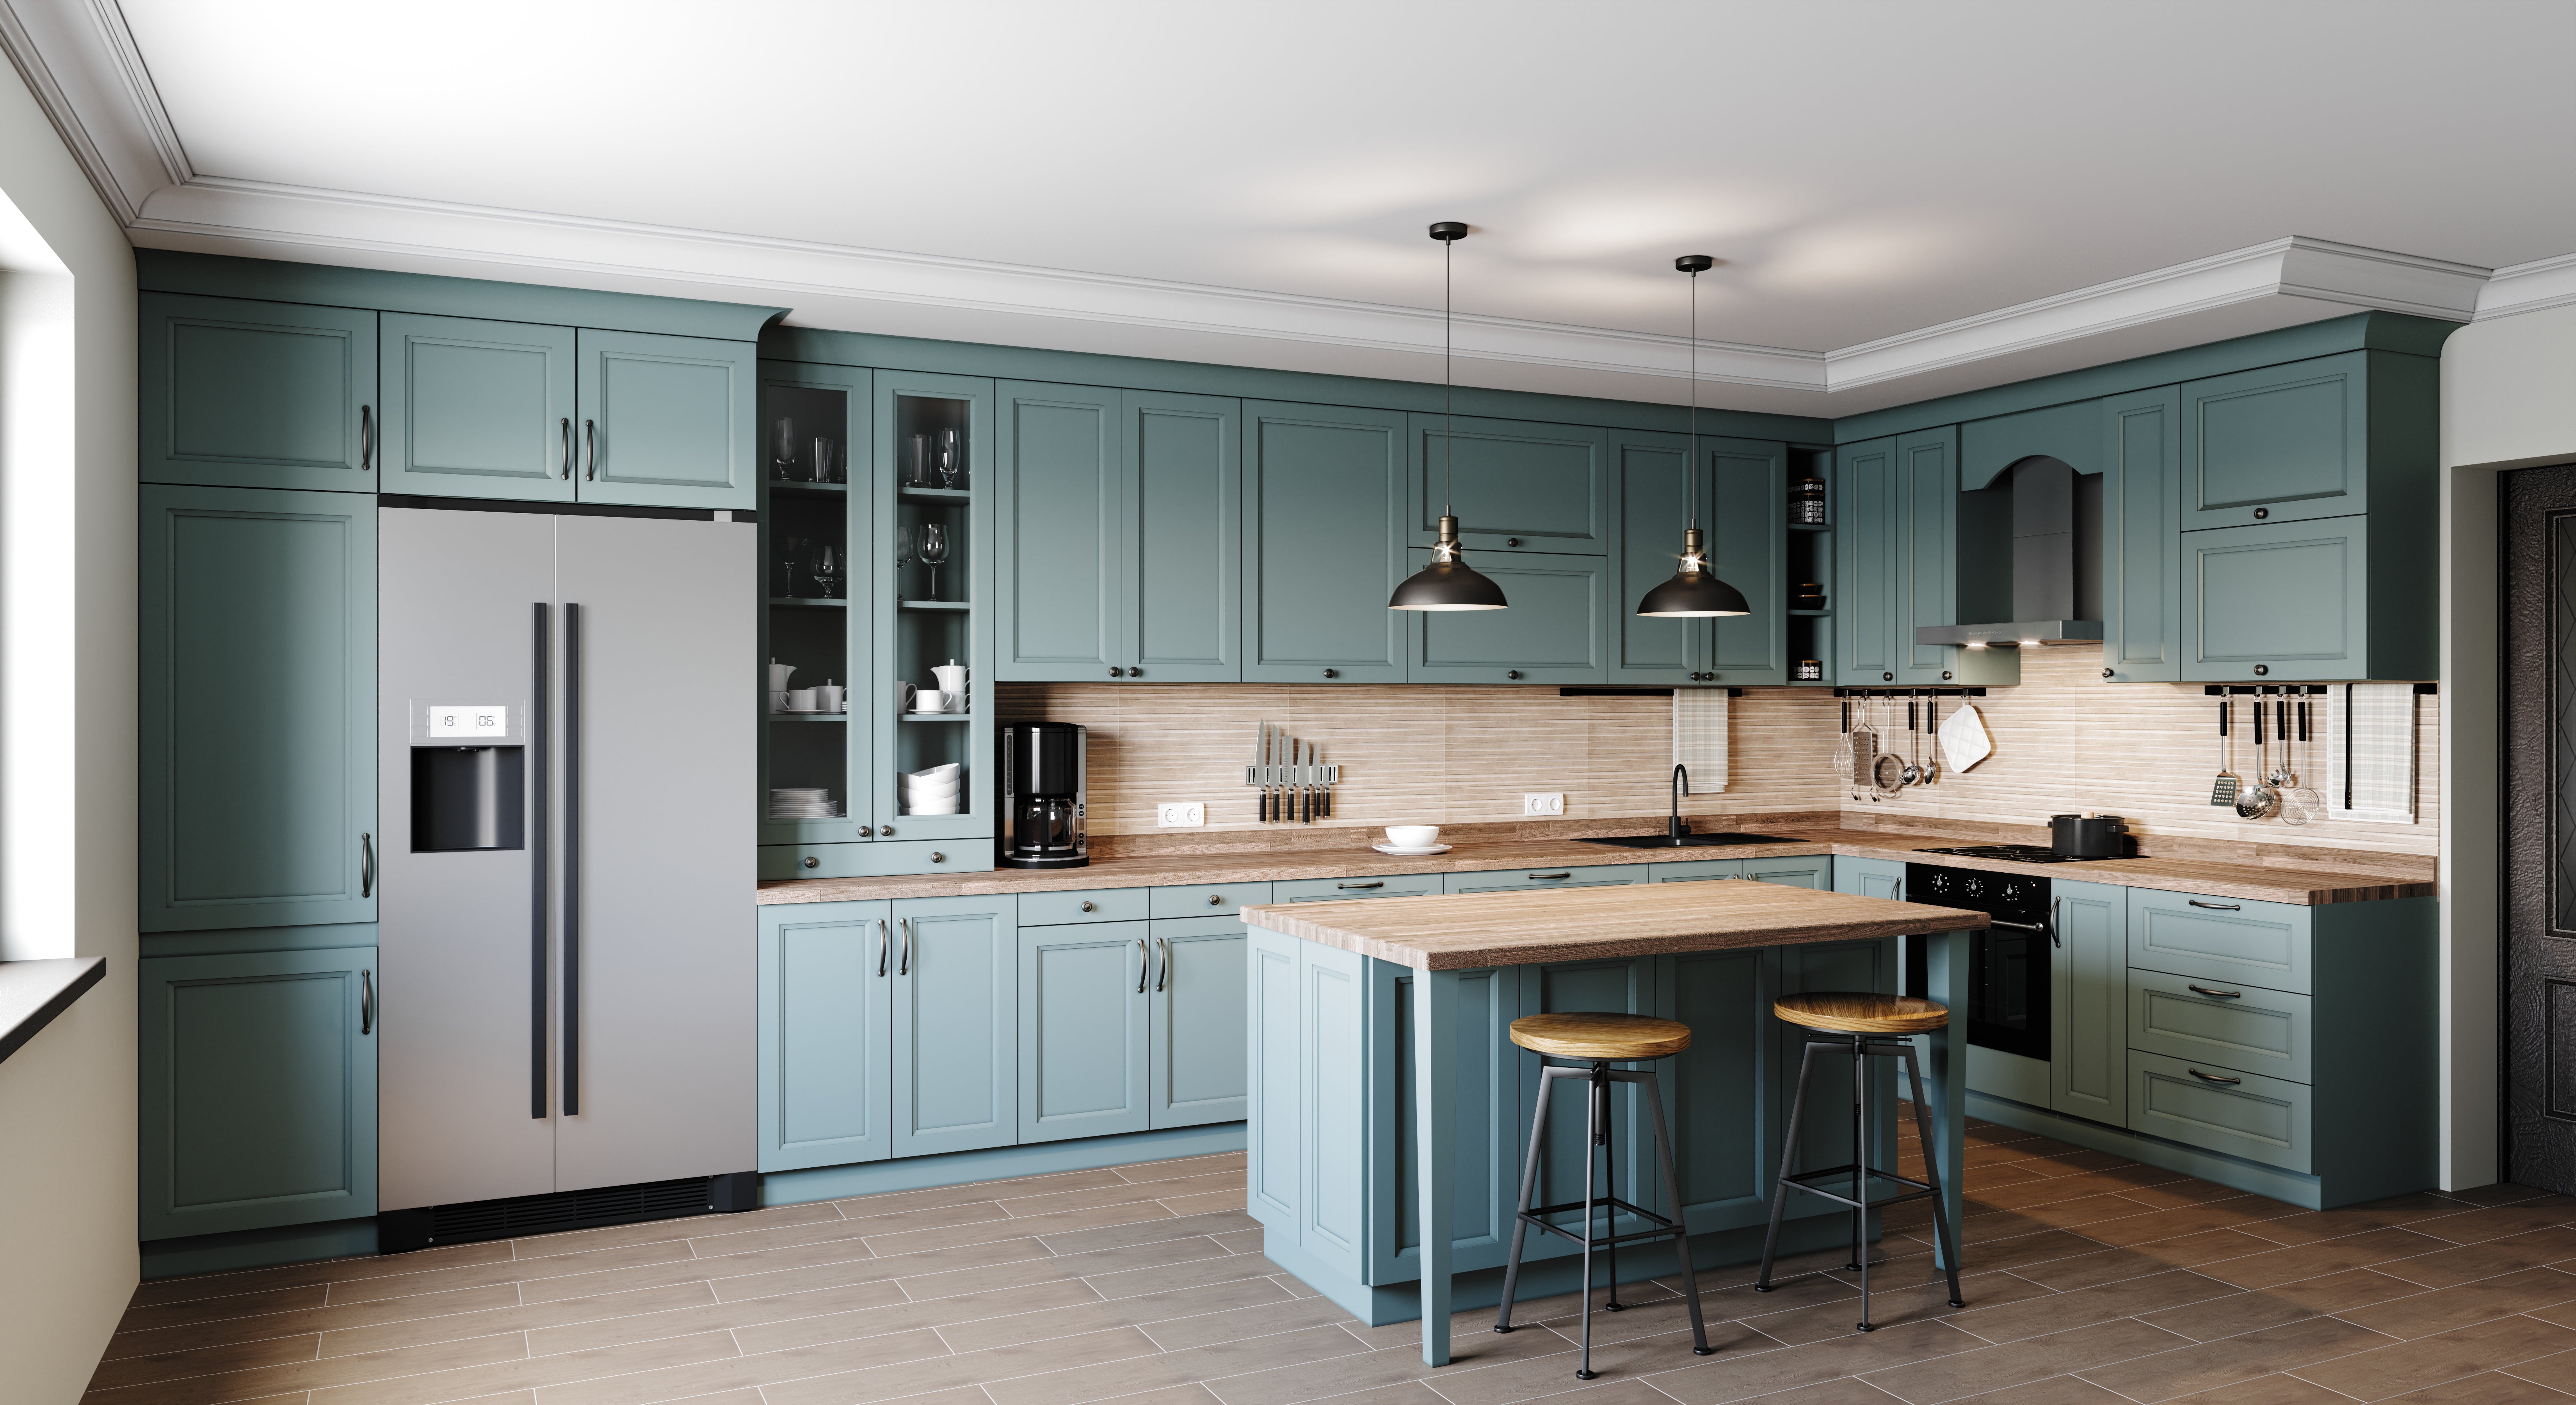 Green Cabinets with wood counter tops in a Kitchen with the Express Line